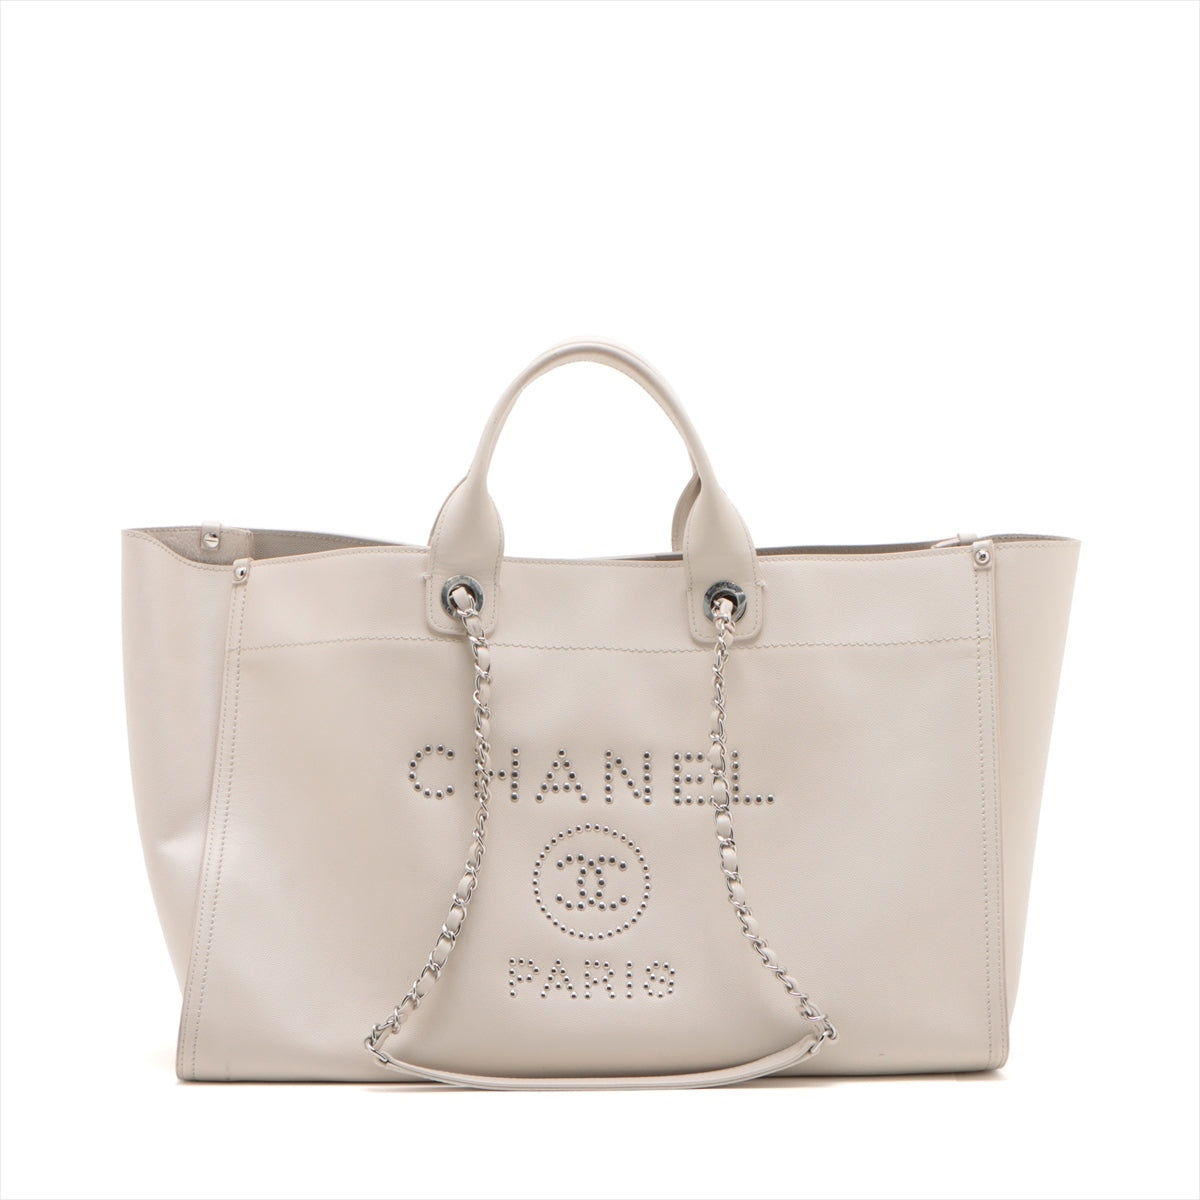 Chanel Deauville GM Caviar Skin Chain Tote Bag 2WAY Beige Silver Metal Fittings 25XXXXXX